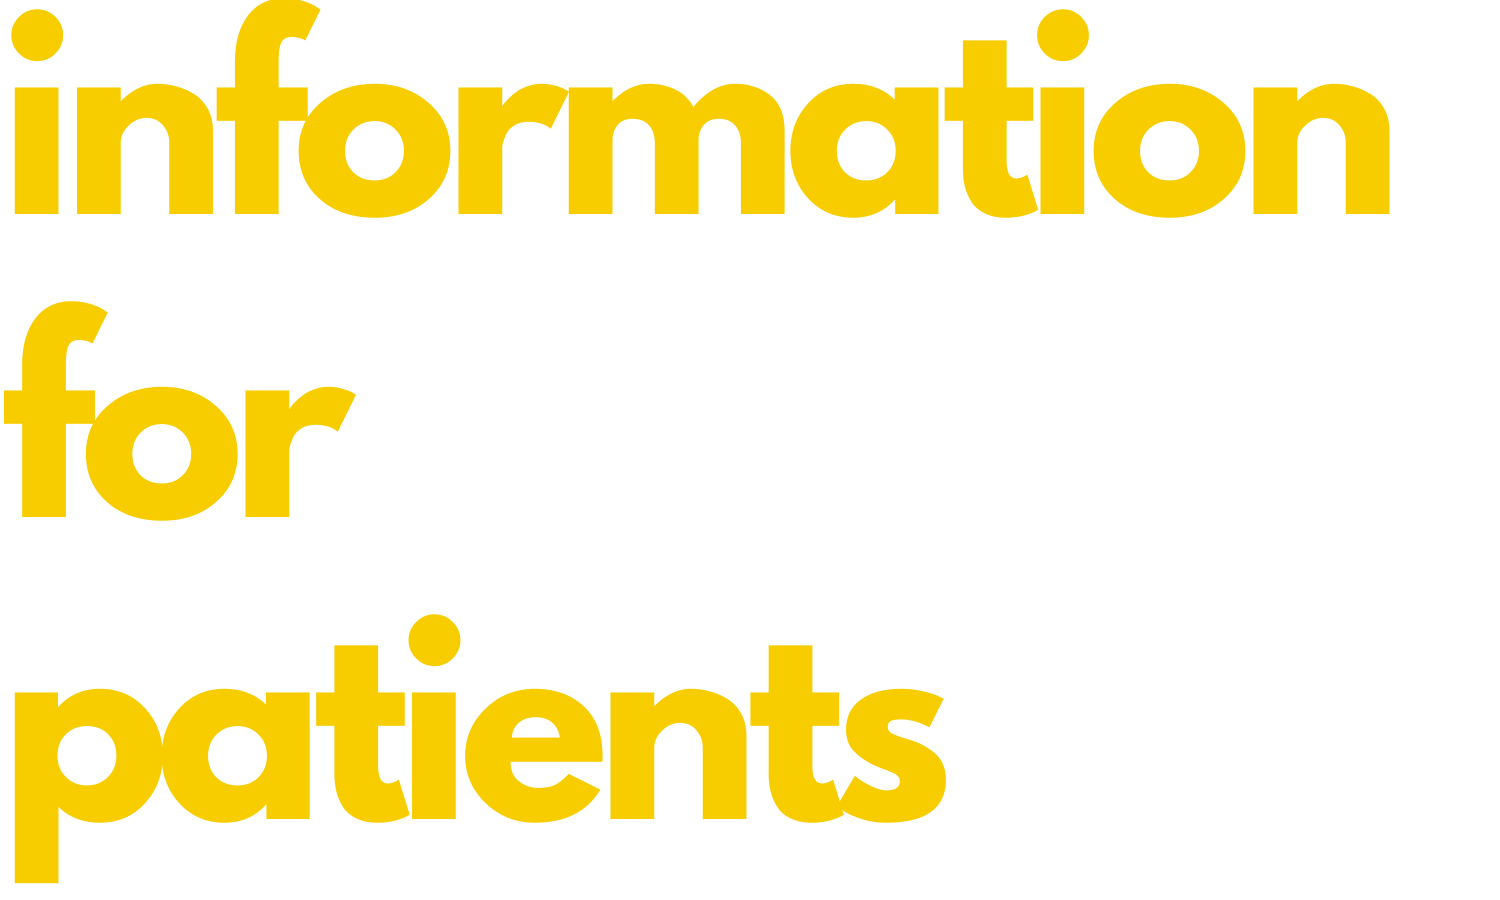 an image that says 'information for patients'